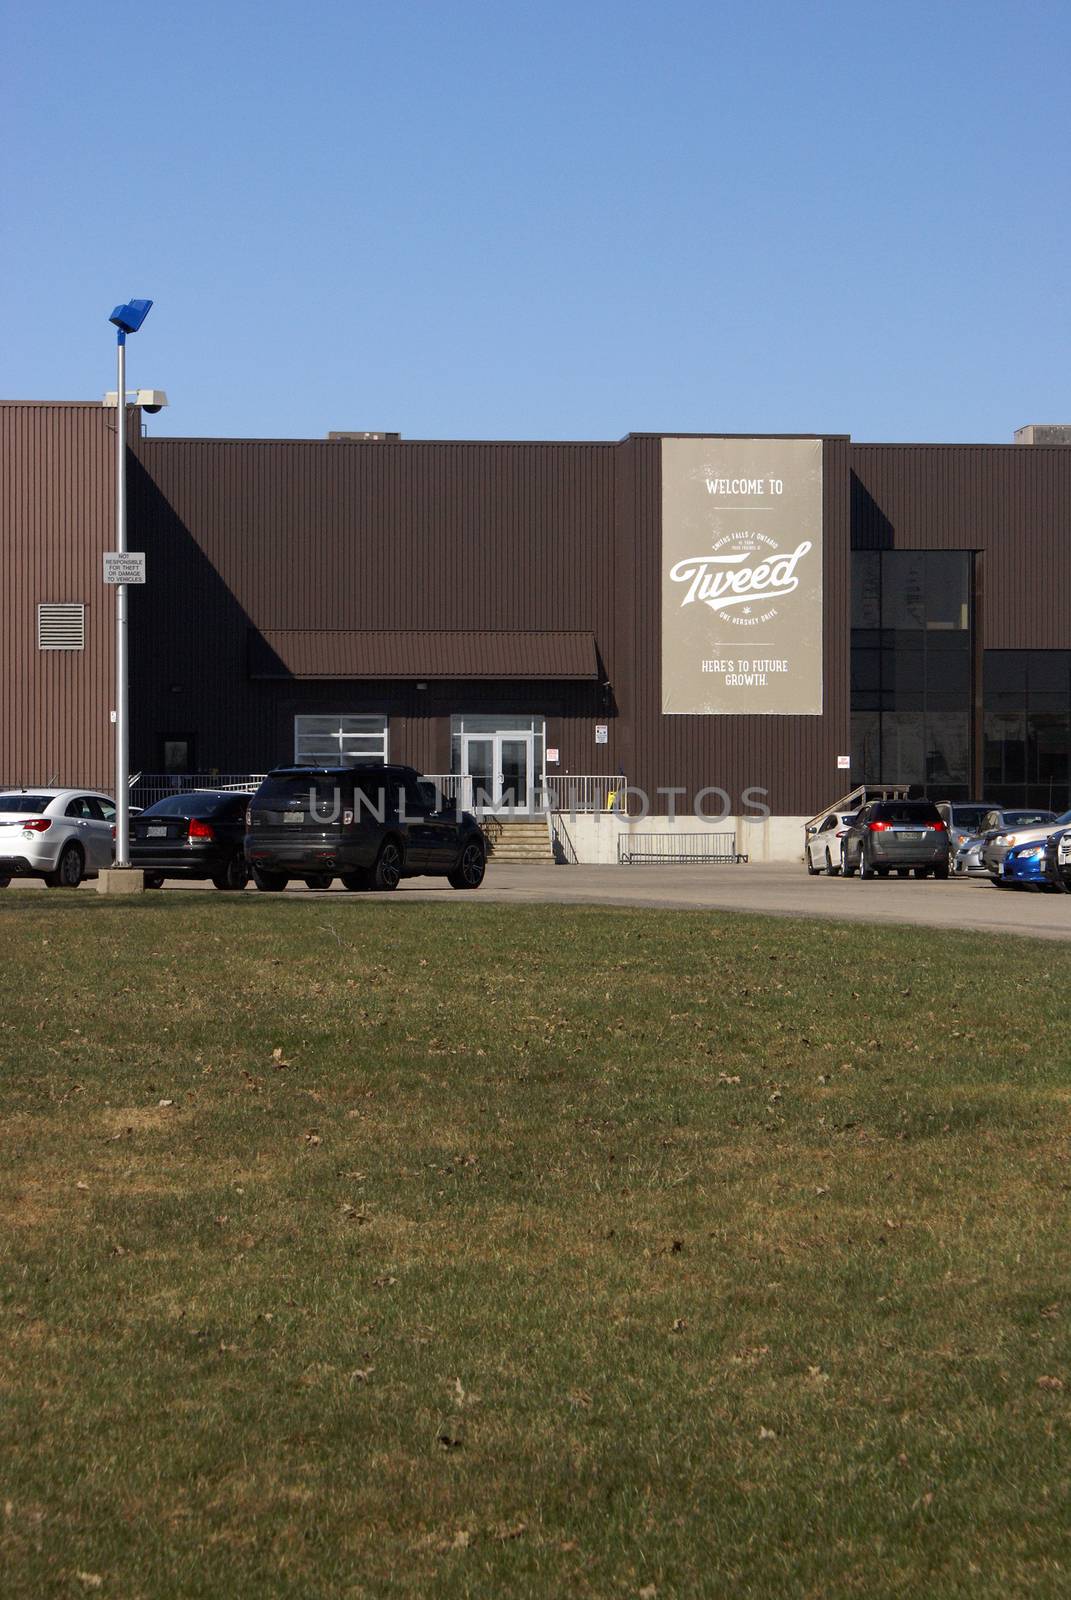 Smiths Falls, ON/Canada: April 18 2016: The main entrance of the Tweed Marijuana Facility which produces and distributes legal weed products.